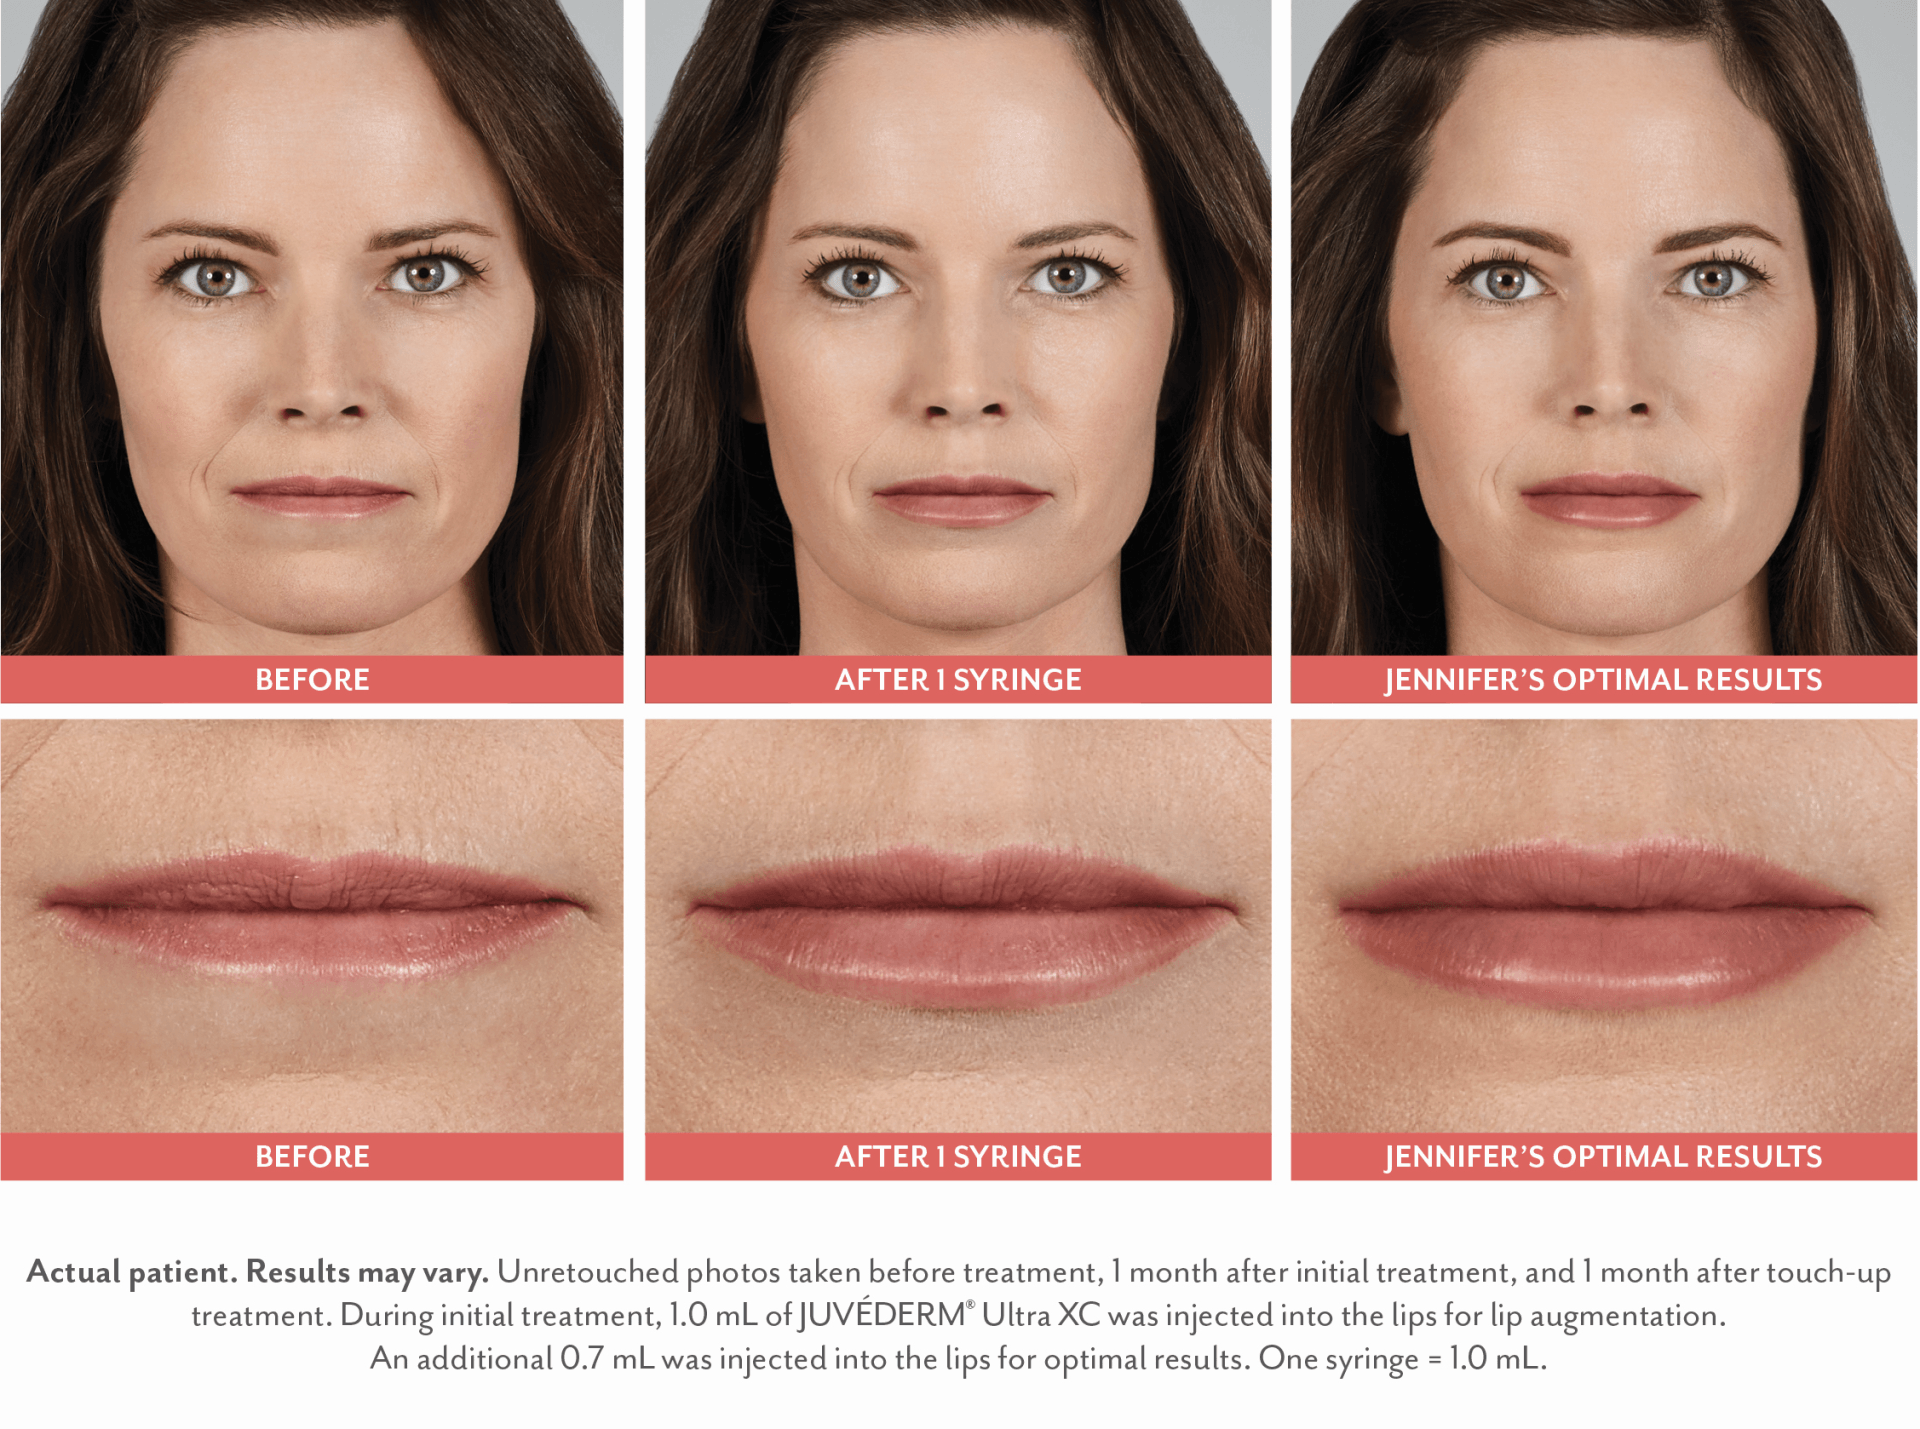 patient before and after treatment with the Juvederm collection of fillers